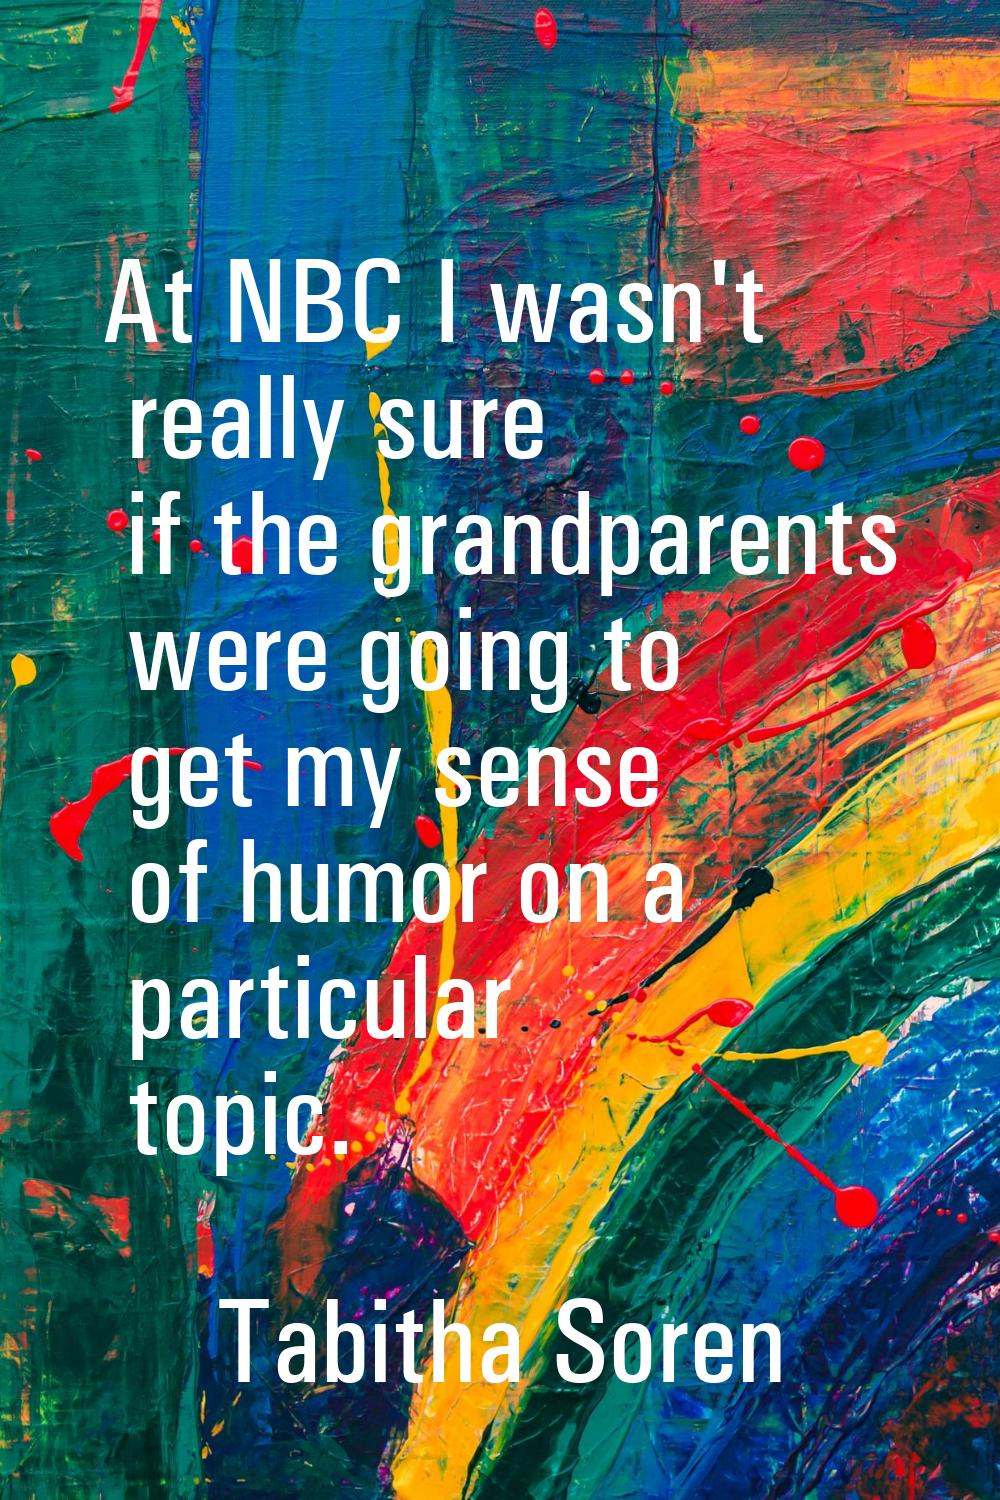 At NBC I wasn't really sure if the grandparents were going to get my sense of humor on a particular